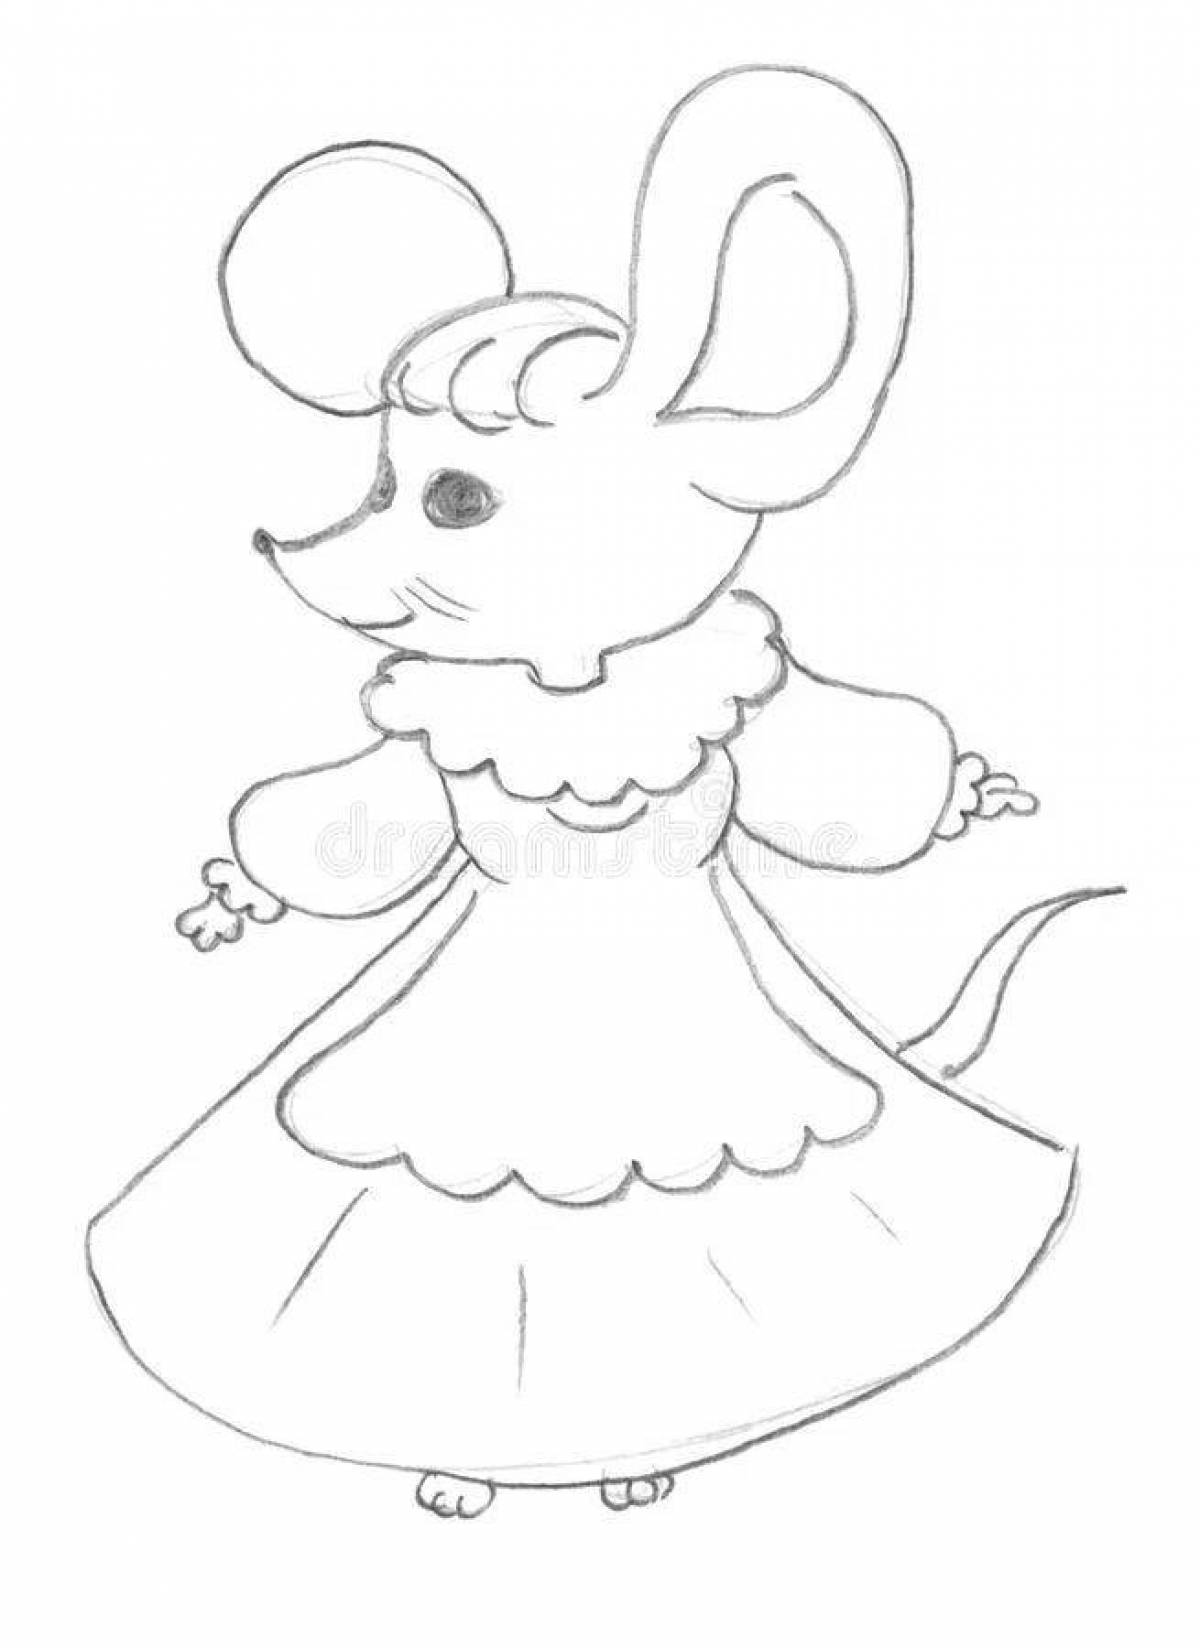 Radiant norushka mouse coloring page